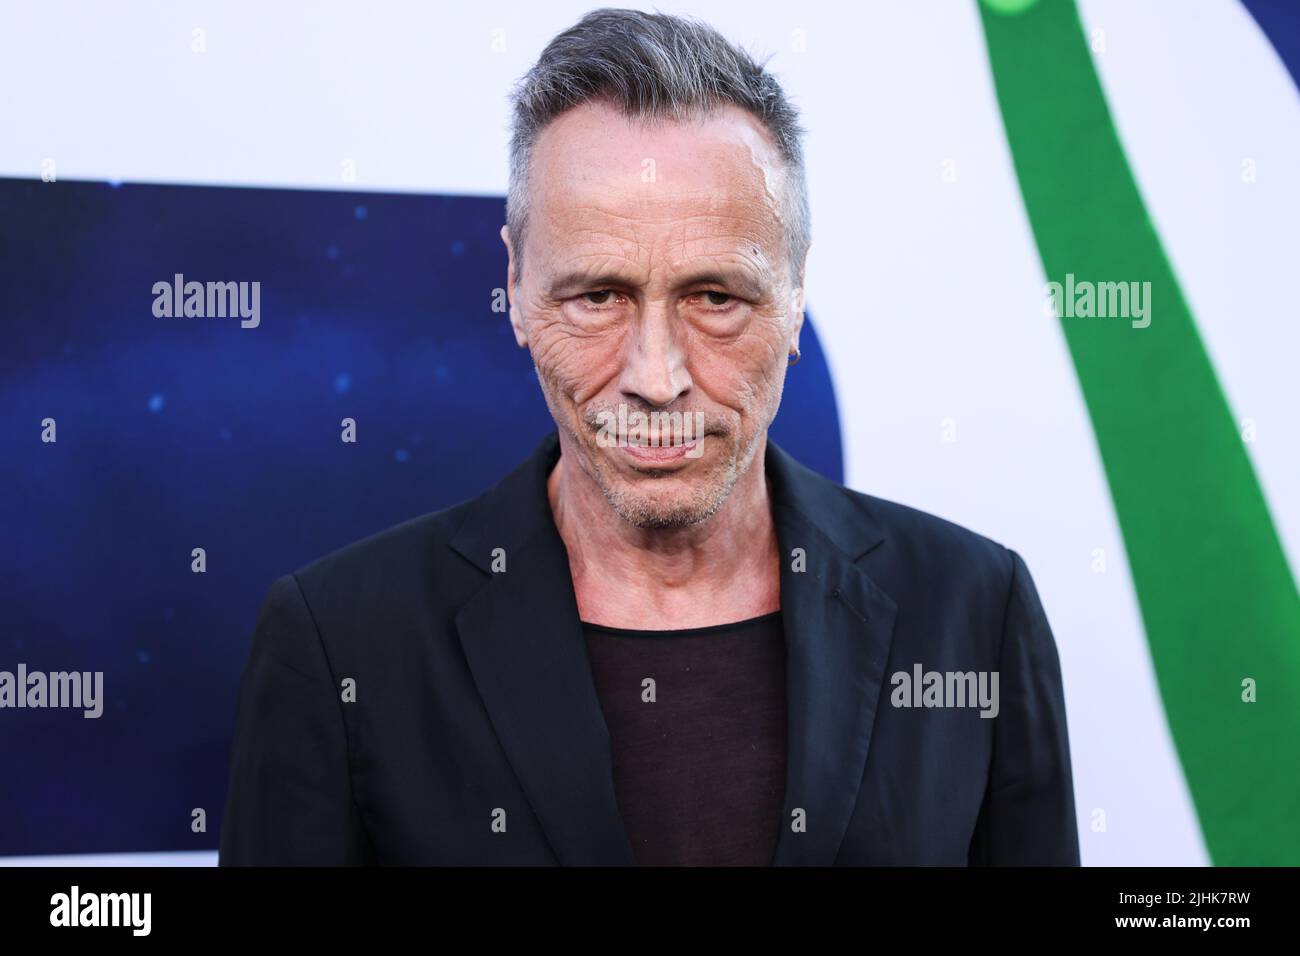 HOLLYWOOD, LOS ANGELES, CALIFORNIA, USA - JULY 18: Michael Wincott arrives at the World Premiere Of Universal Pictures' 'Nope' held at the TCL Chinese Theatre IMAX on July 18, 2022 in Hollywood, Los Angeles, California, United States. (Photo by Xavier Collin/Image Press Agency) Stock Photo